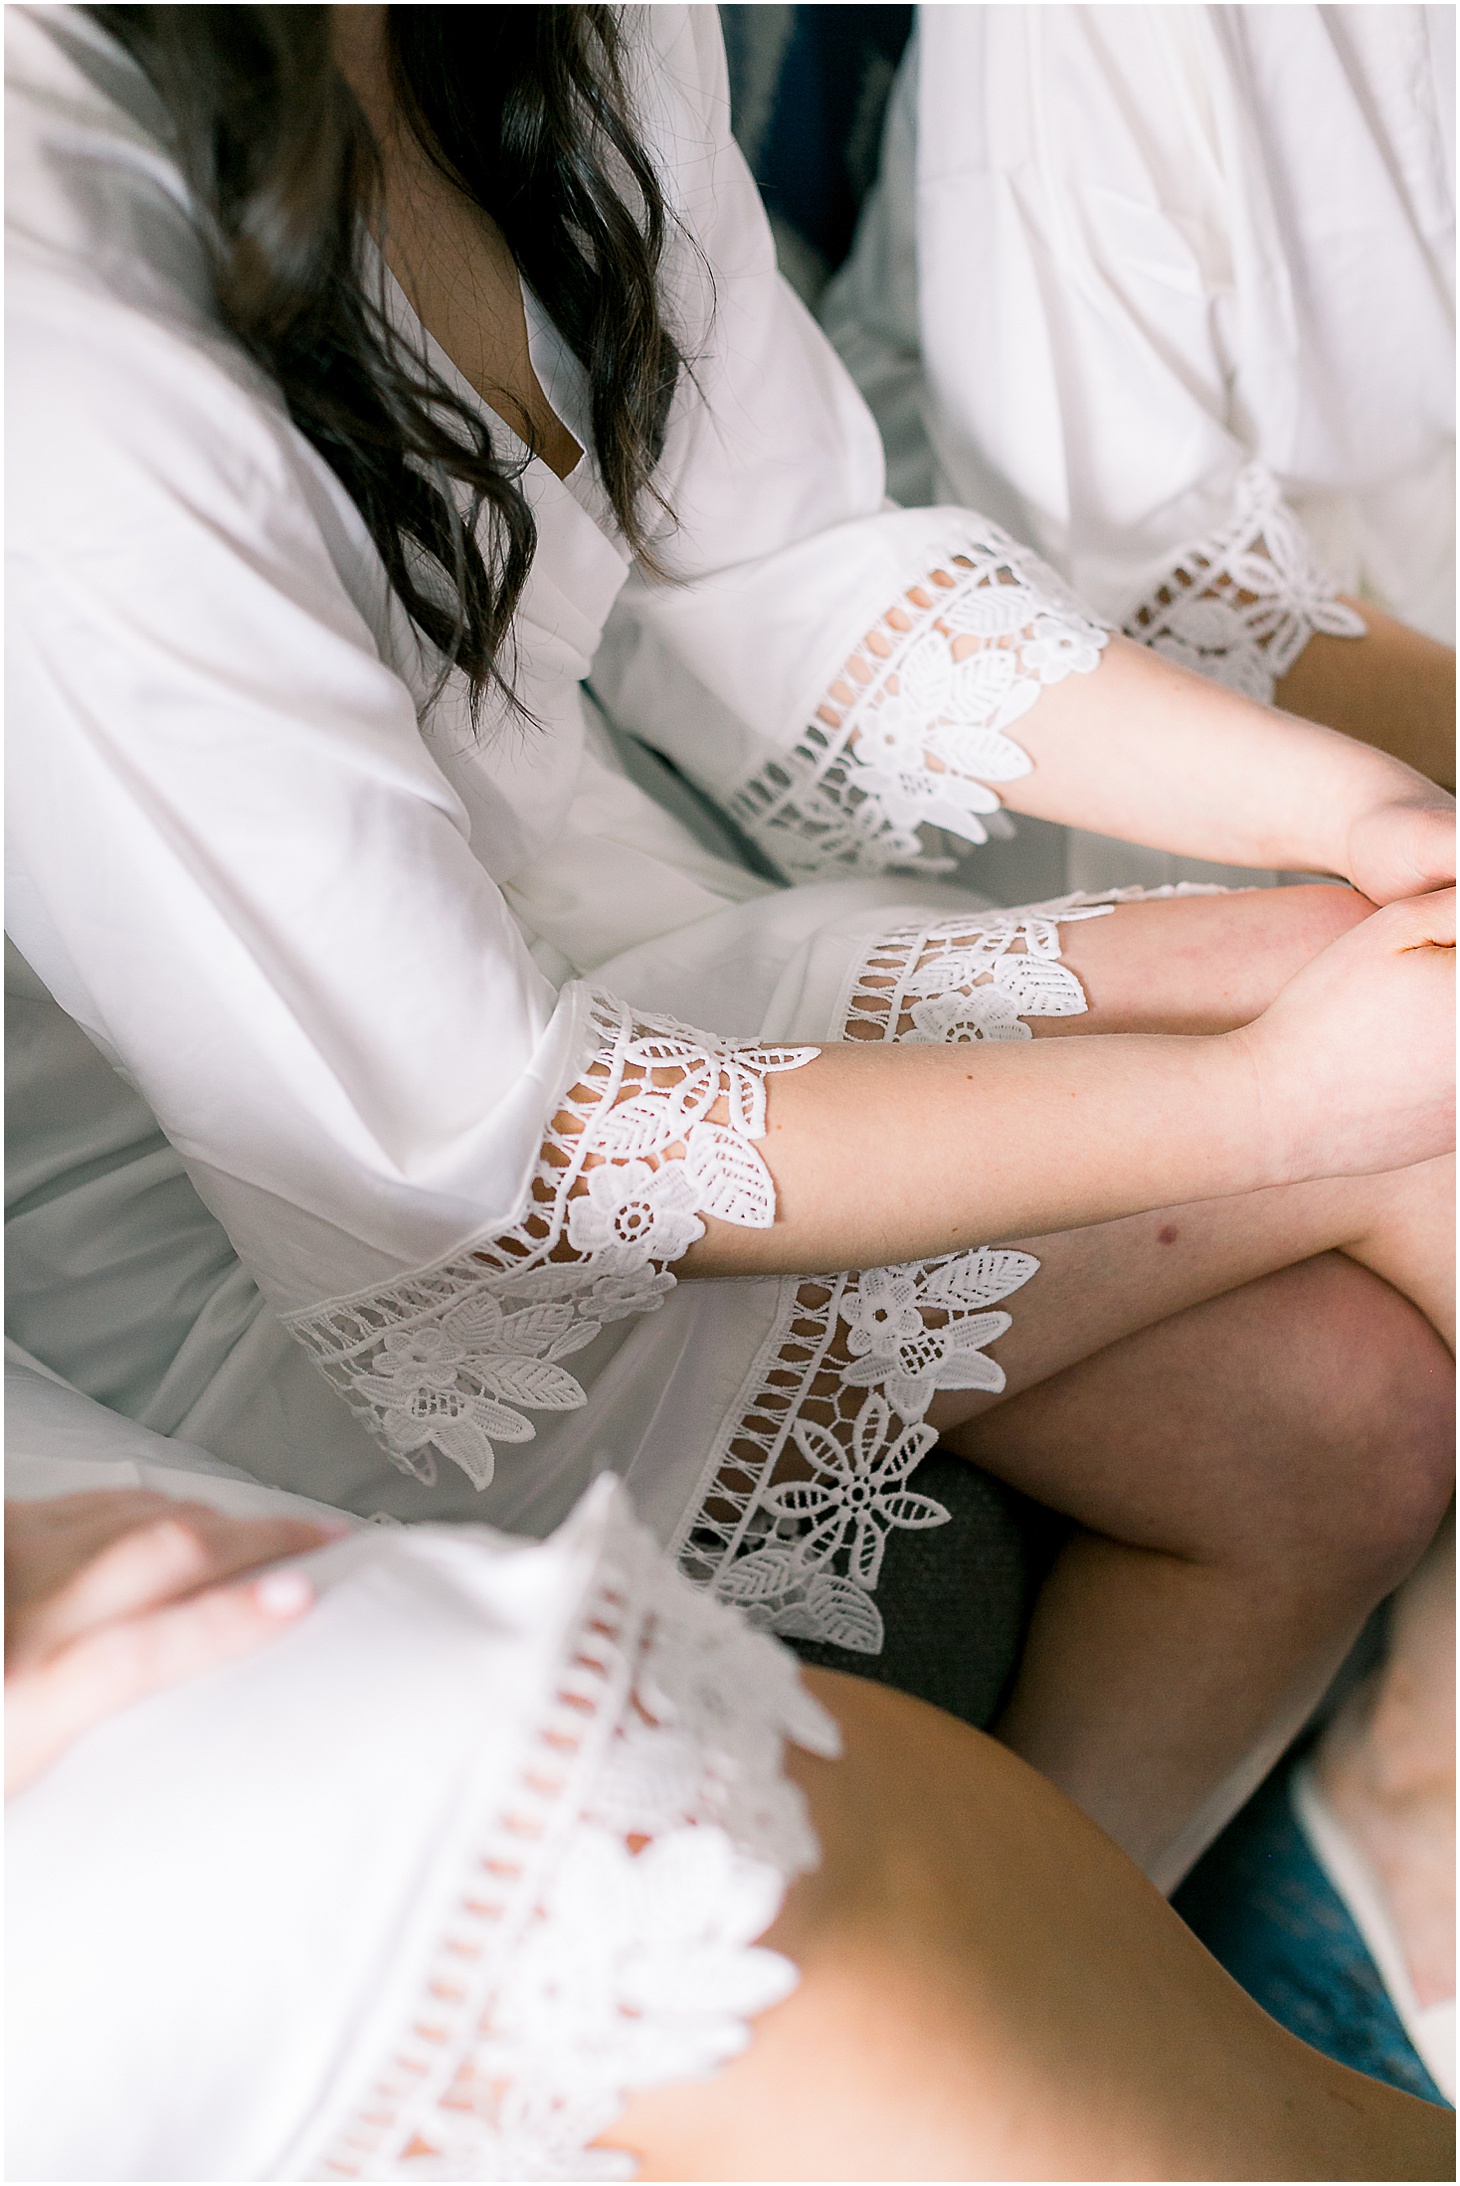 Lace Robe Detail, Bridal Party Getting Ready at Inter-Continental Hotel at Navy Yards in DC, Modern Textural Spring Wedding at District Winery, Sarah Bradshaw Photography, DC Wedding Photographer